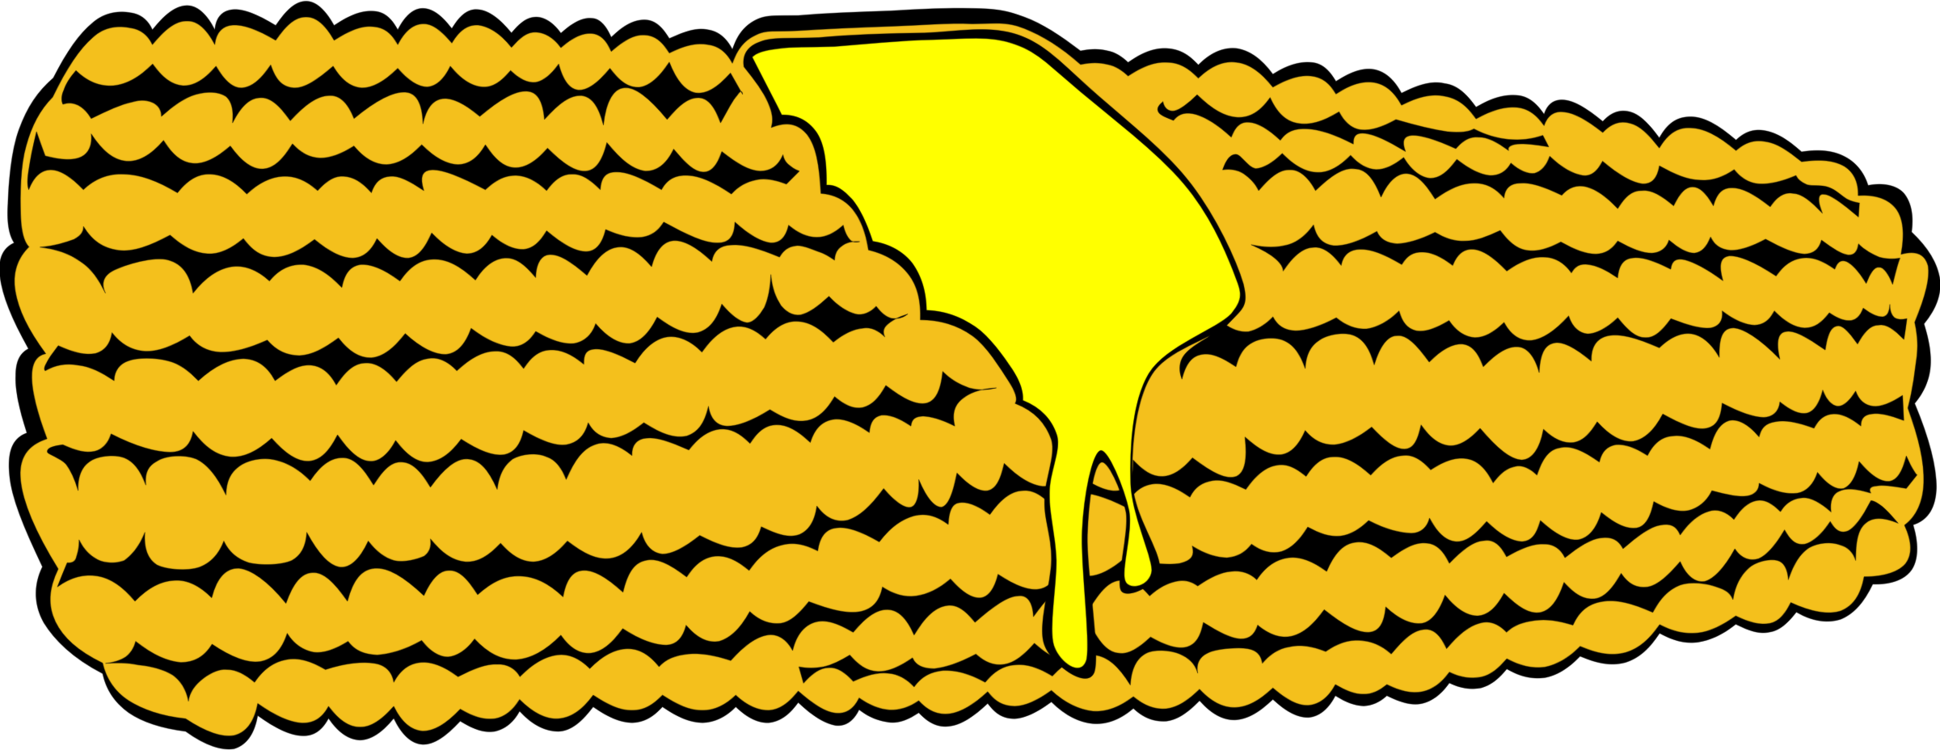 Corn On The Cob Drawing PNG Image Transparent